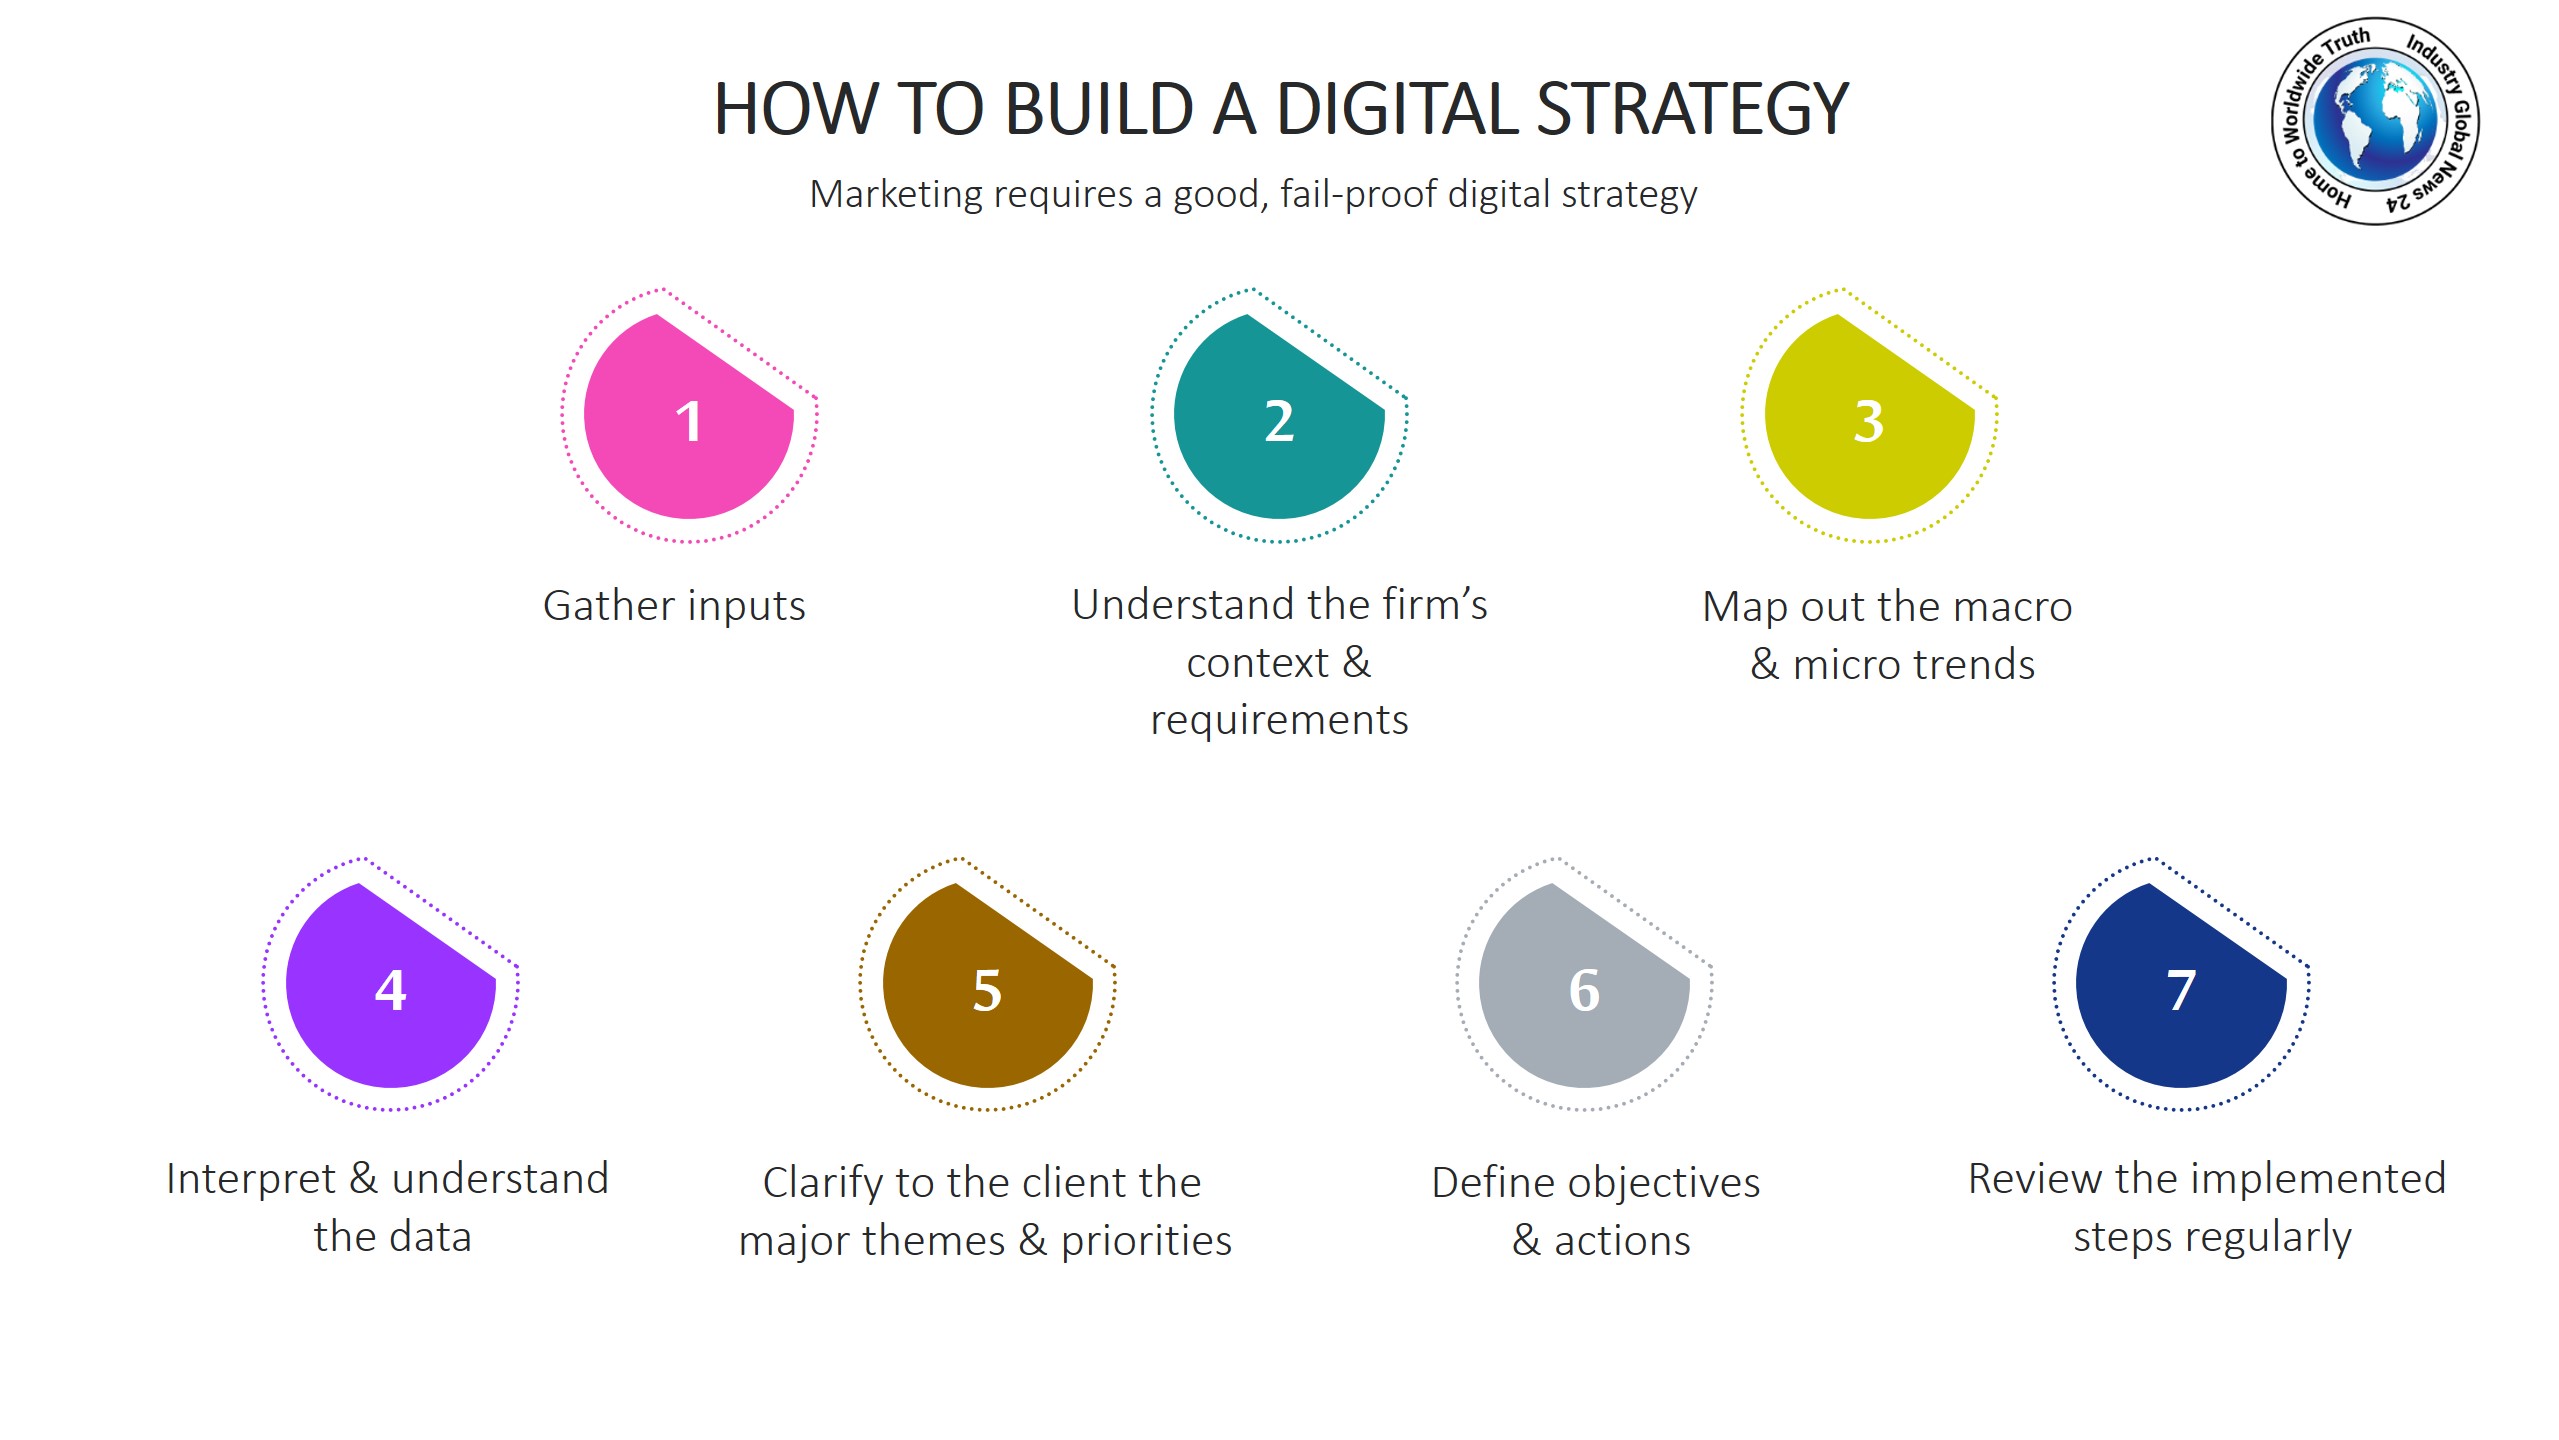 How to build a digital strategy